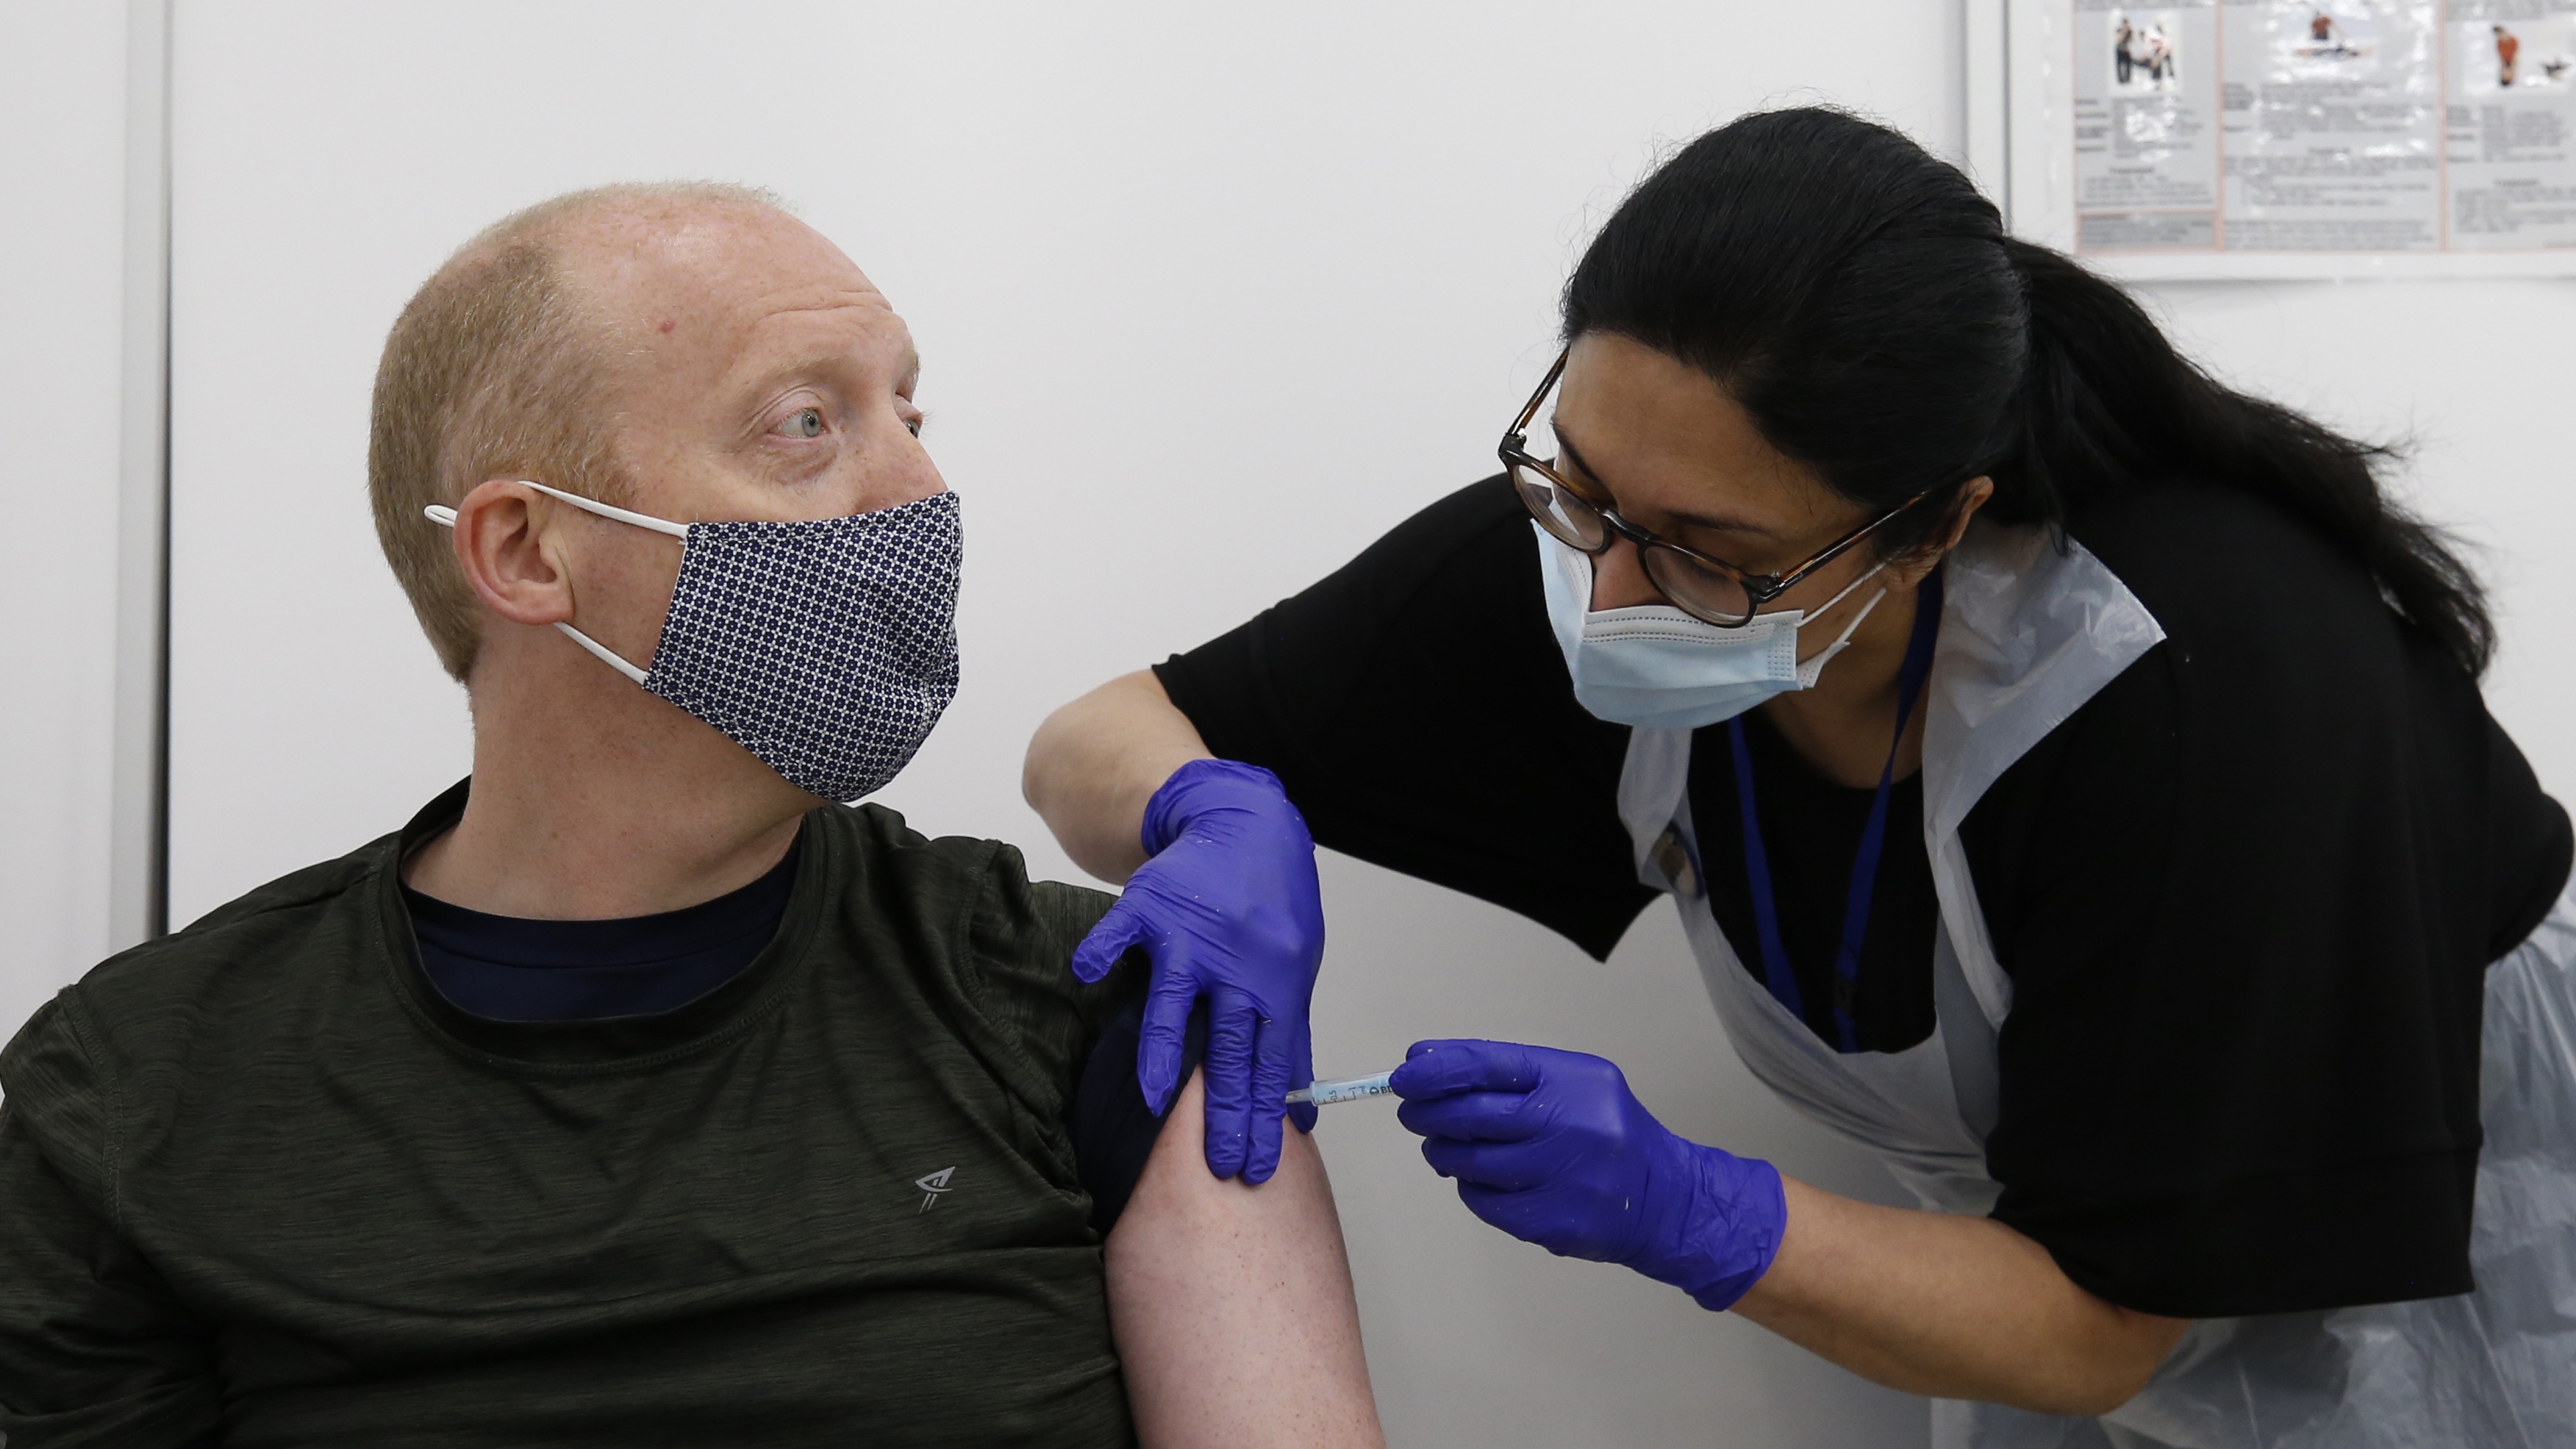 A man receives his Covid-19 vaccination